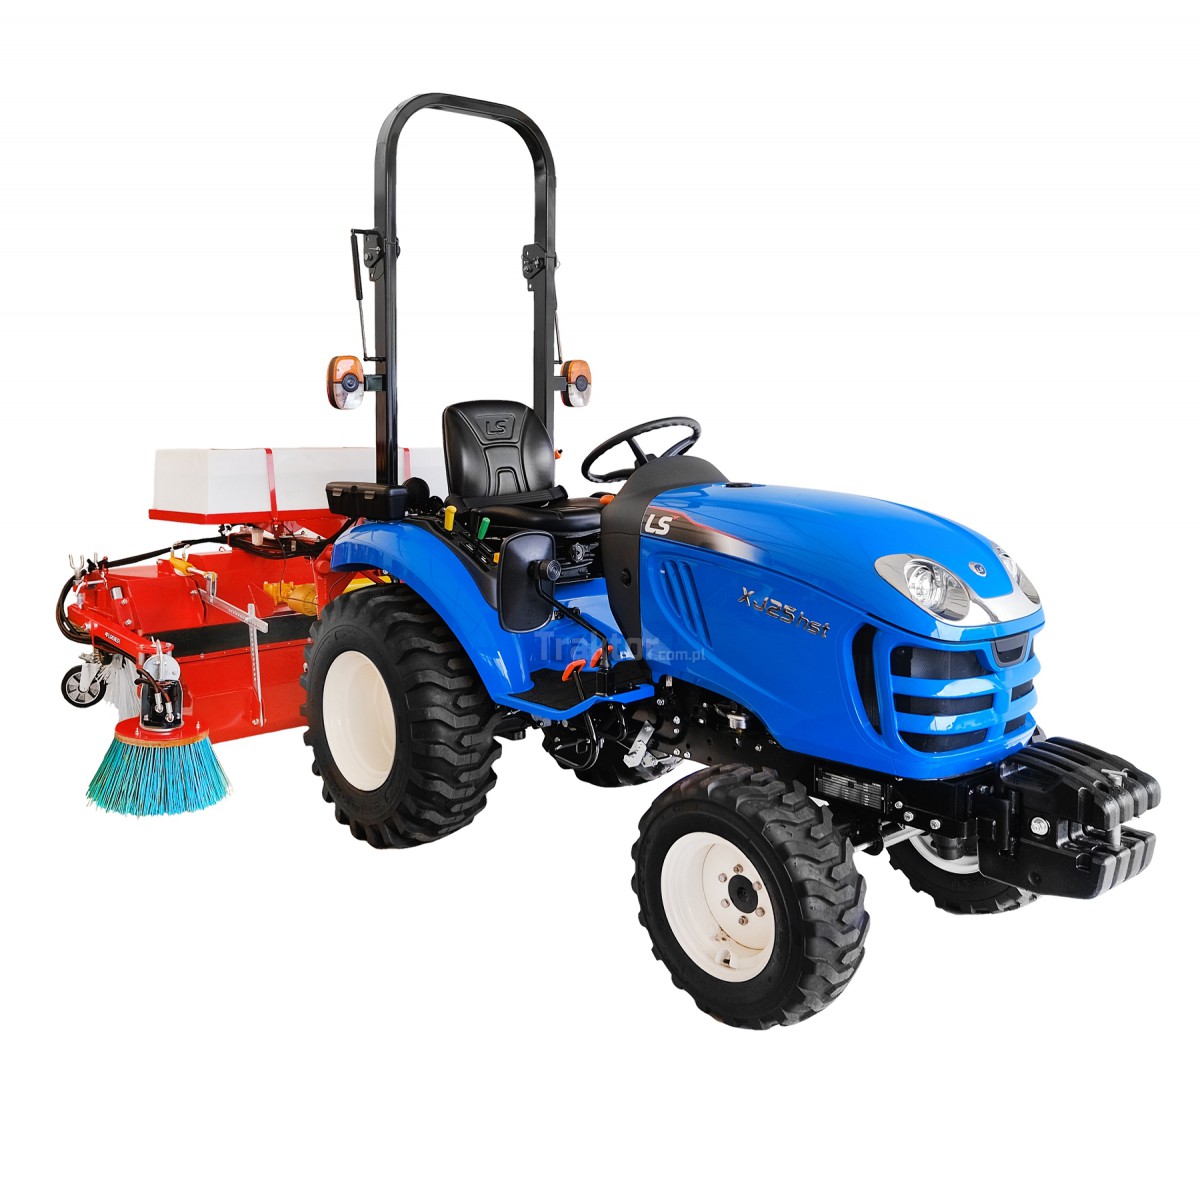 LS Tractor XJ25 HST 4x4 - 24.4 HP / IND + 120 cm sweeper with basket, irrigation container and side brush 4FARMER